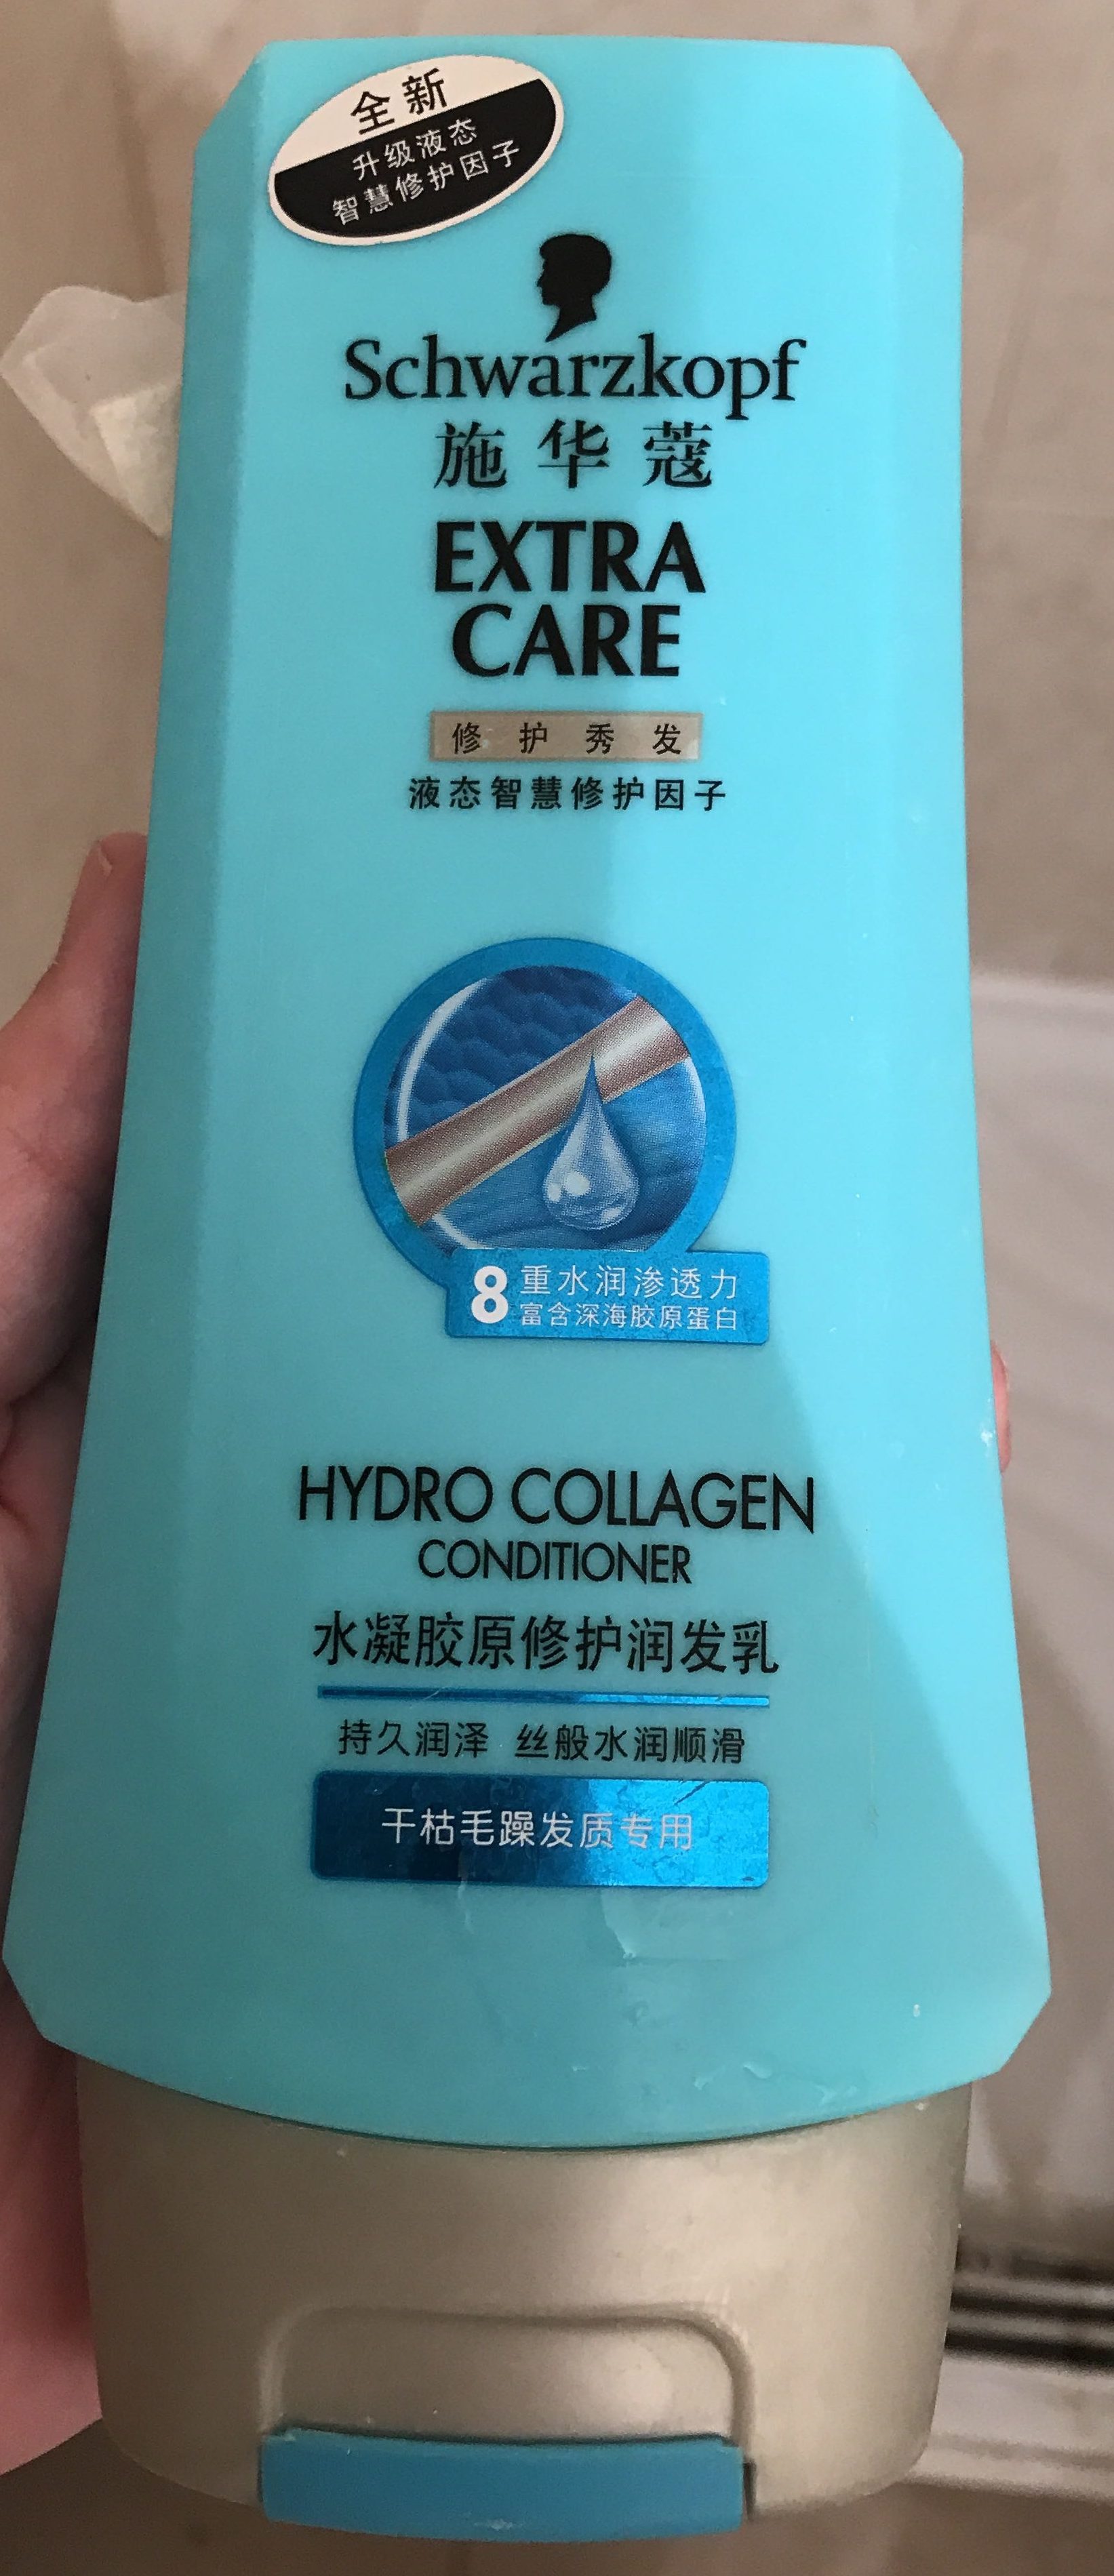 Extra Care 修护润发 Hydro Collagen Conditioner - Product - zh